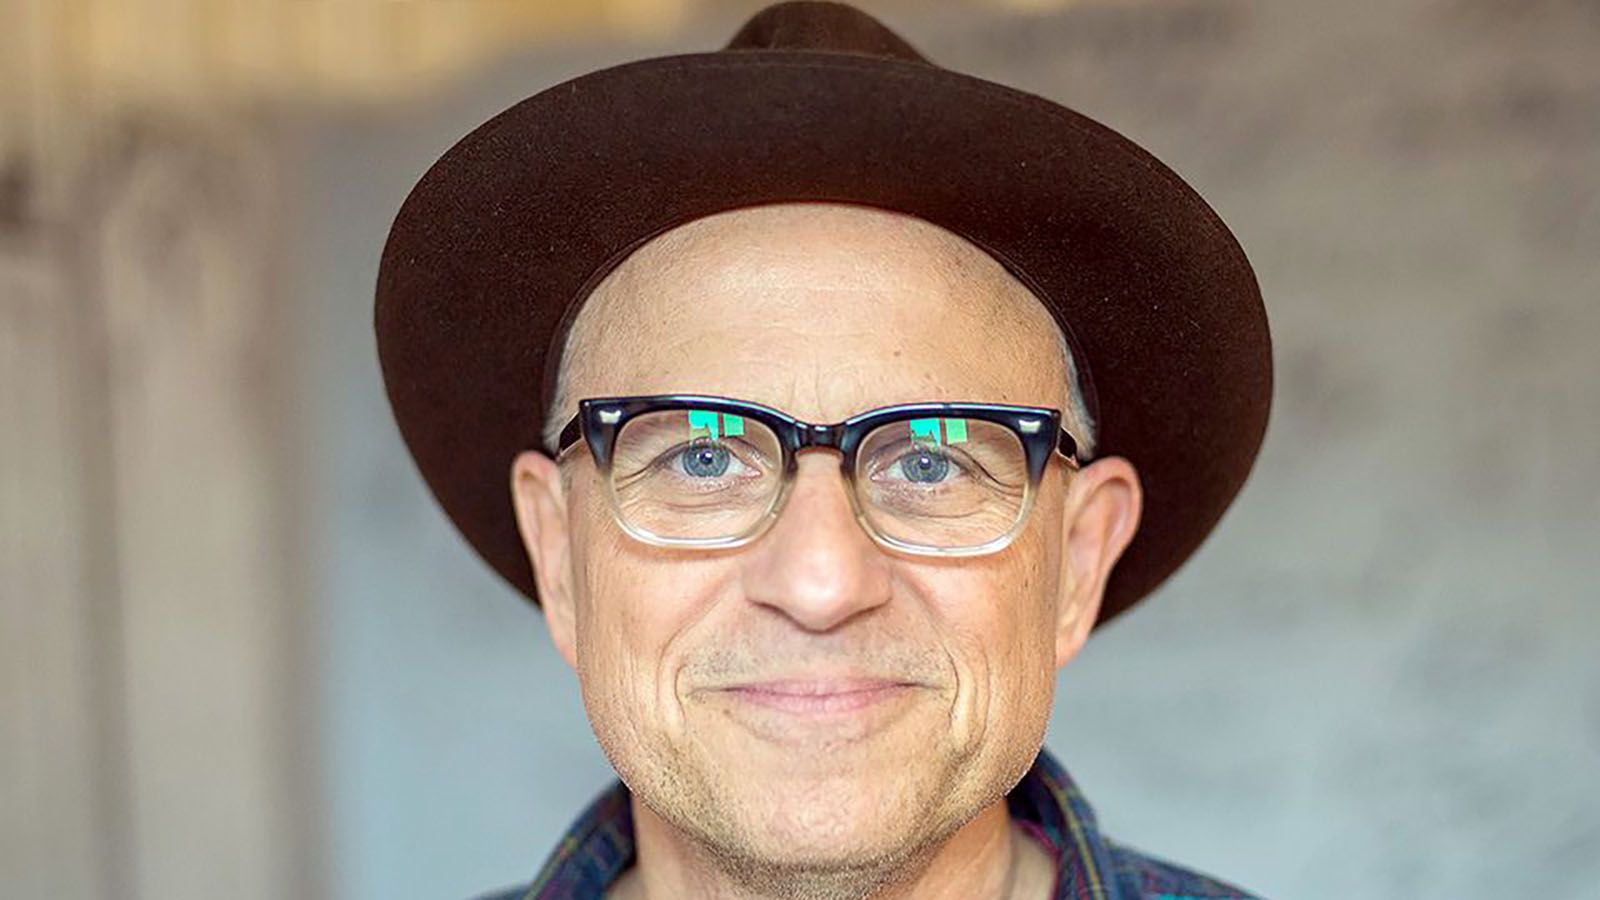 Bobcat Goldthwait will be at Piere's on April 13.